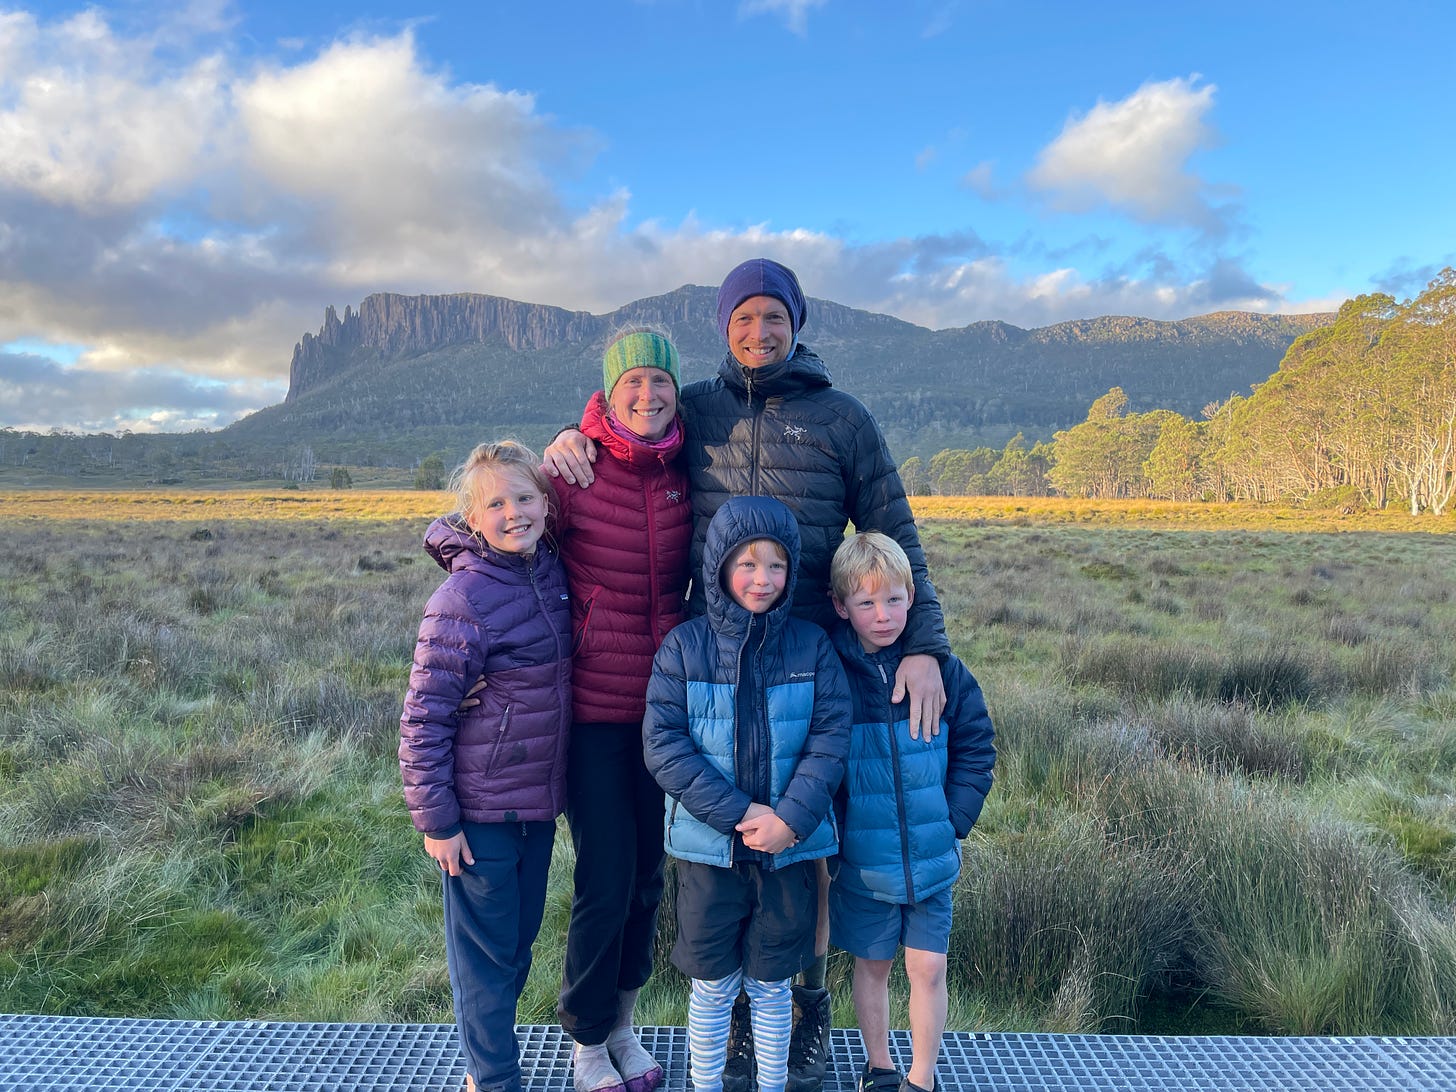 family portrait outside with sunset on the mountains, 2 adults and 3 kids wearing down jackets